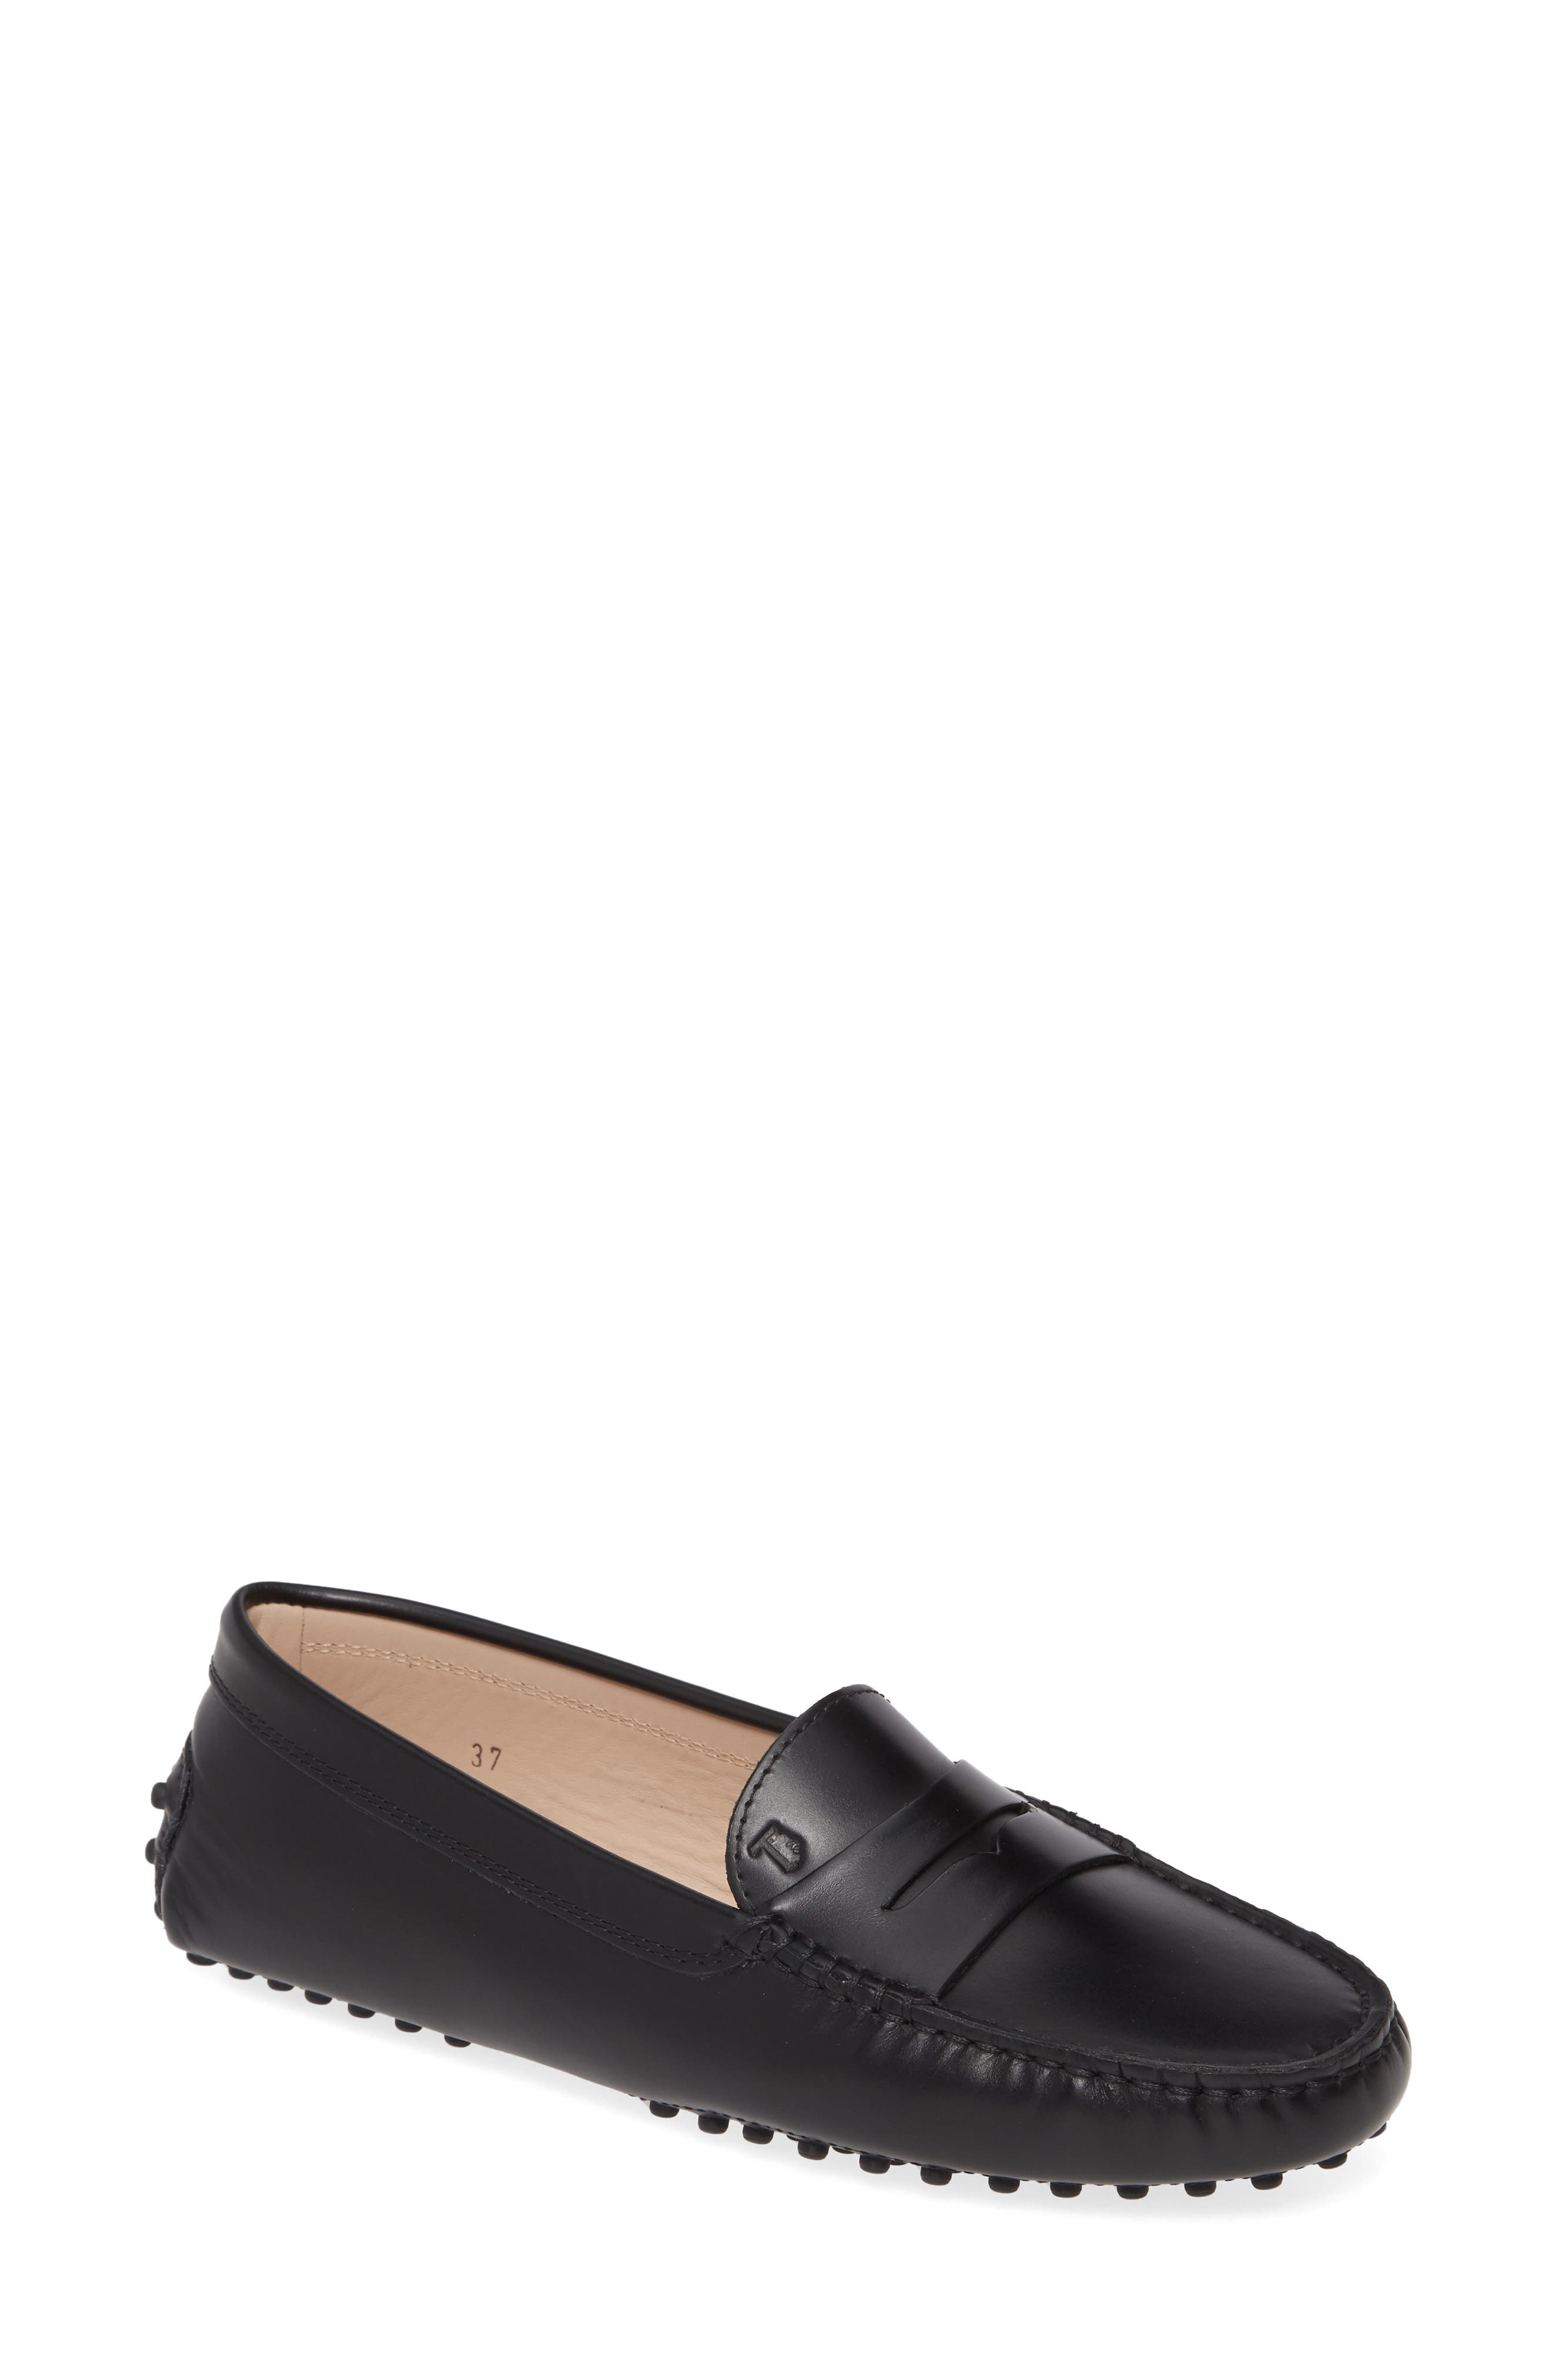 tods driving shoes womens